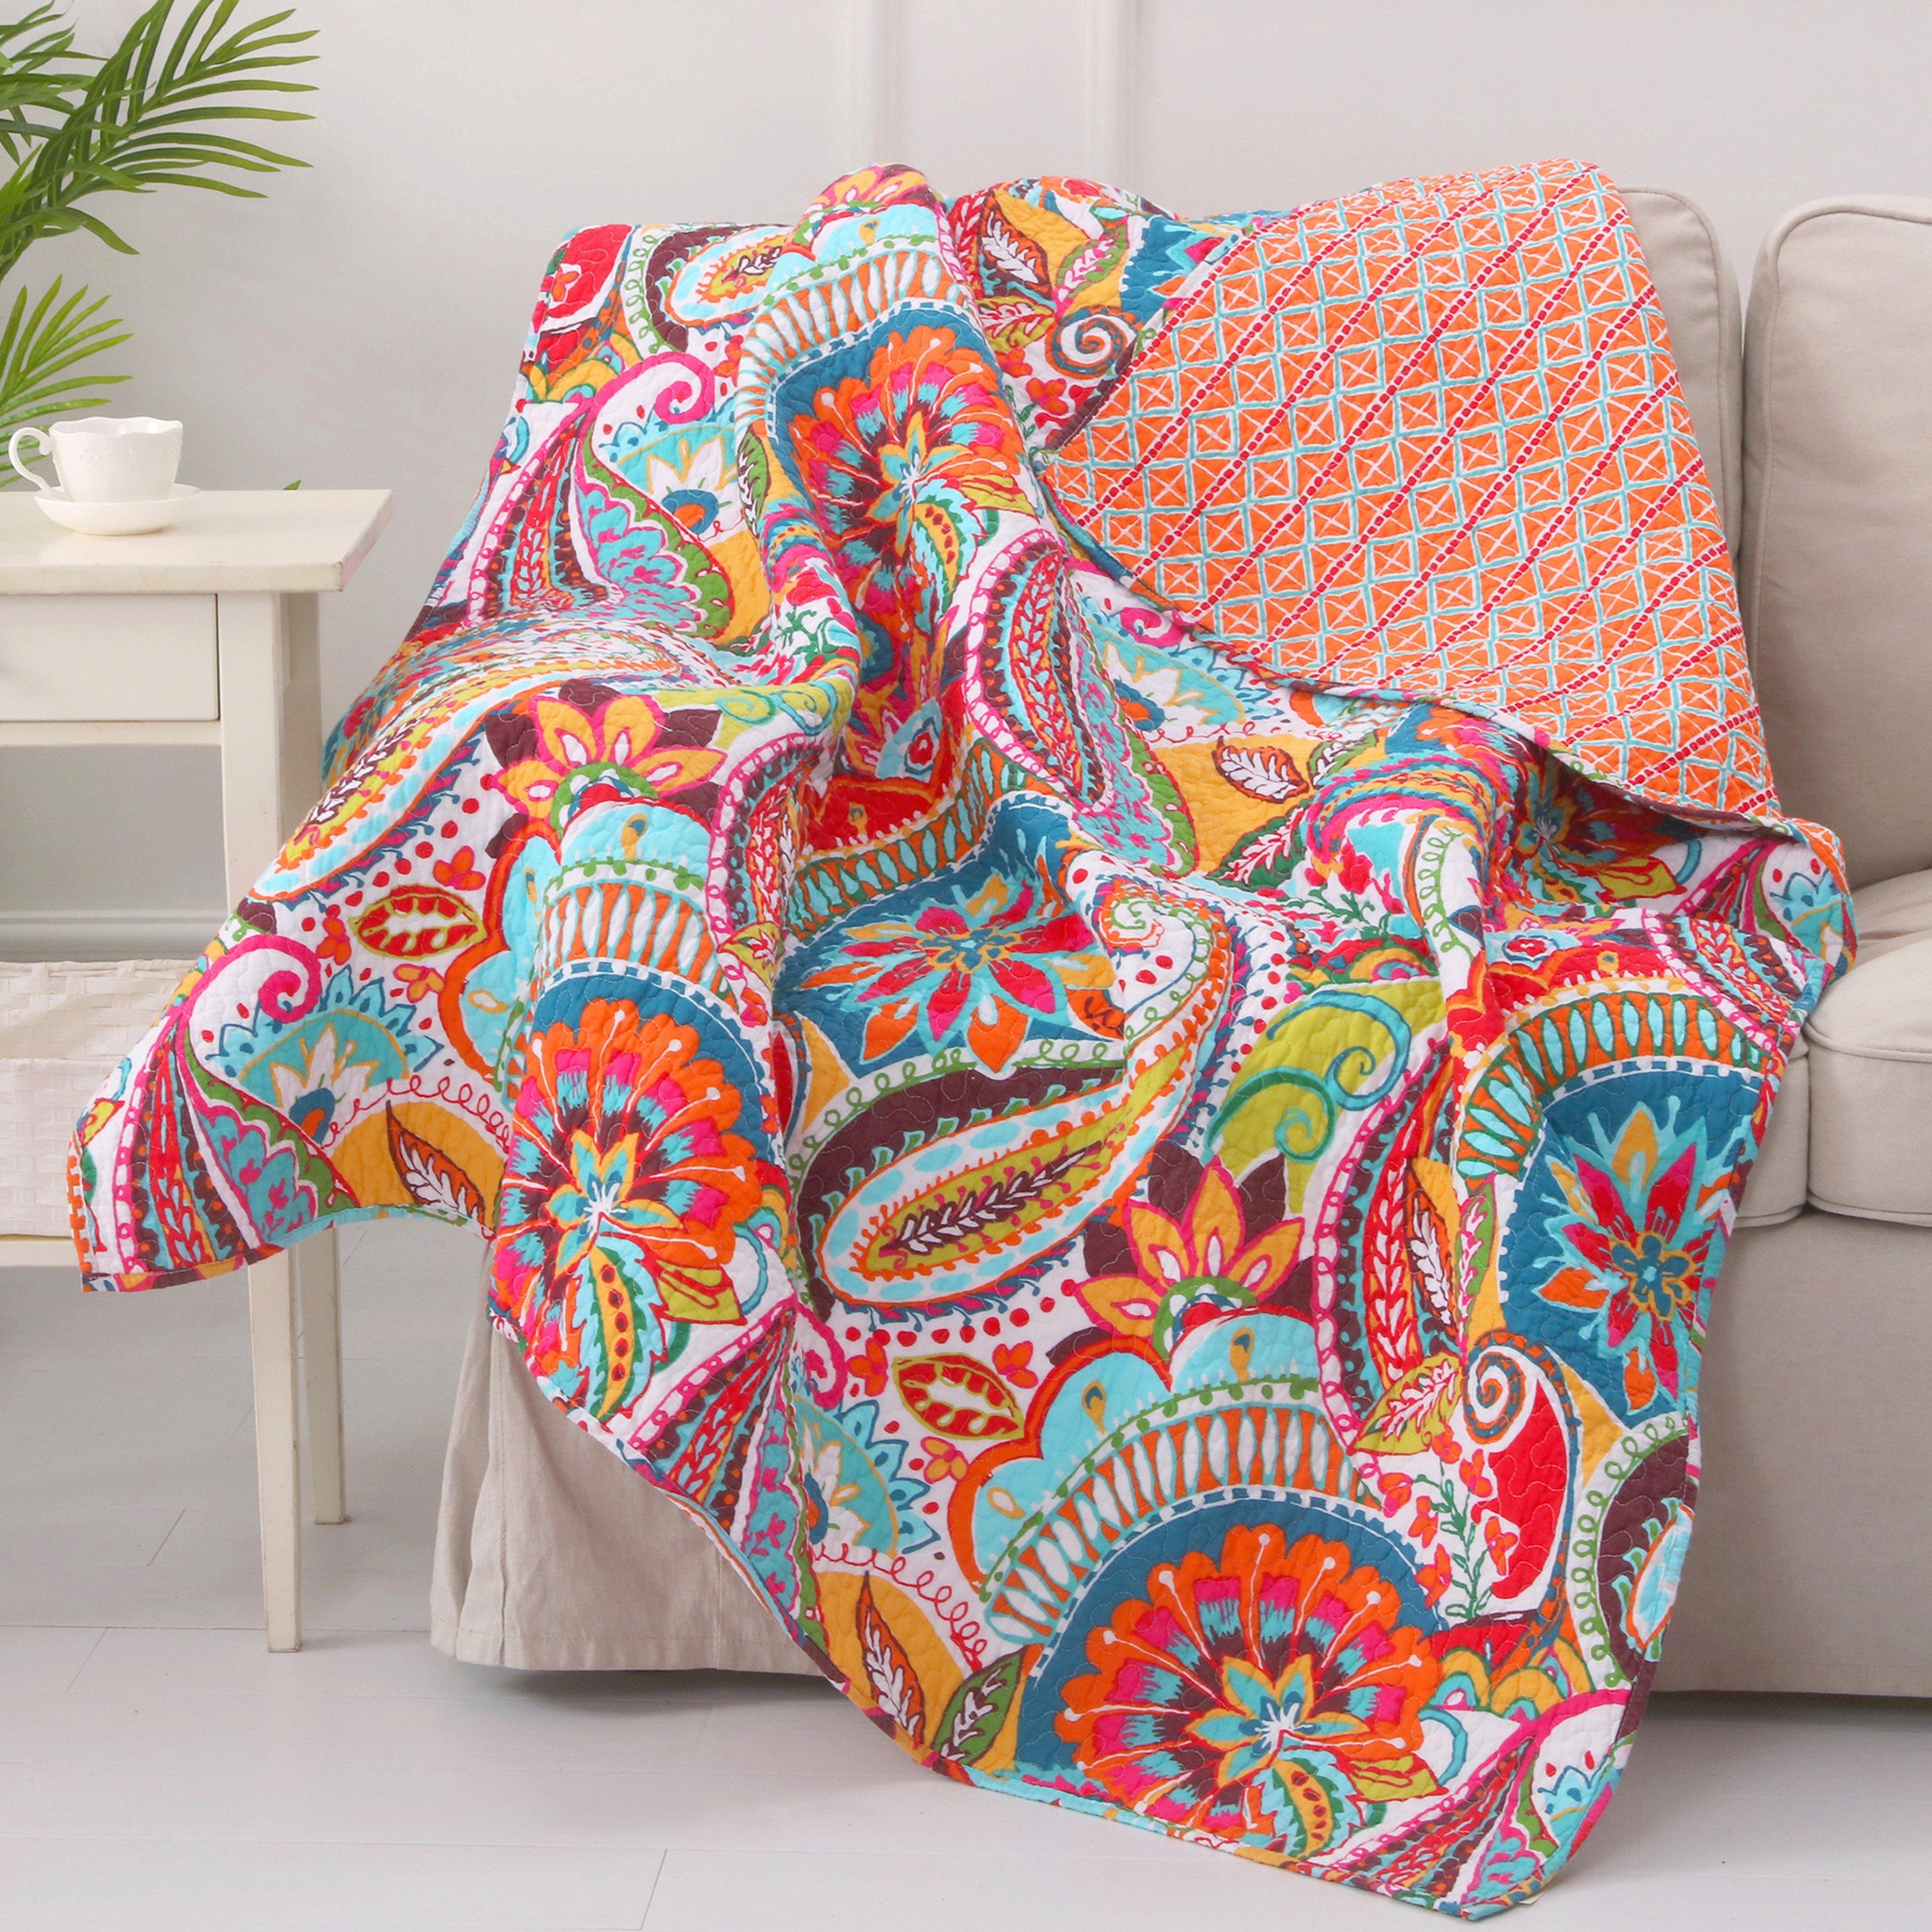 Levtex Home Rhapsody Reversible Quilted Throw